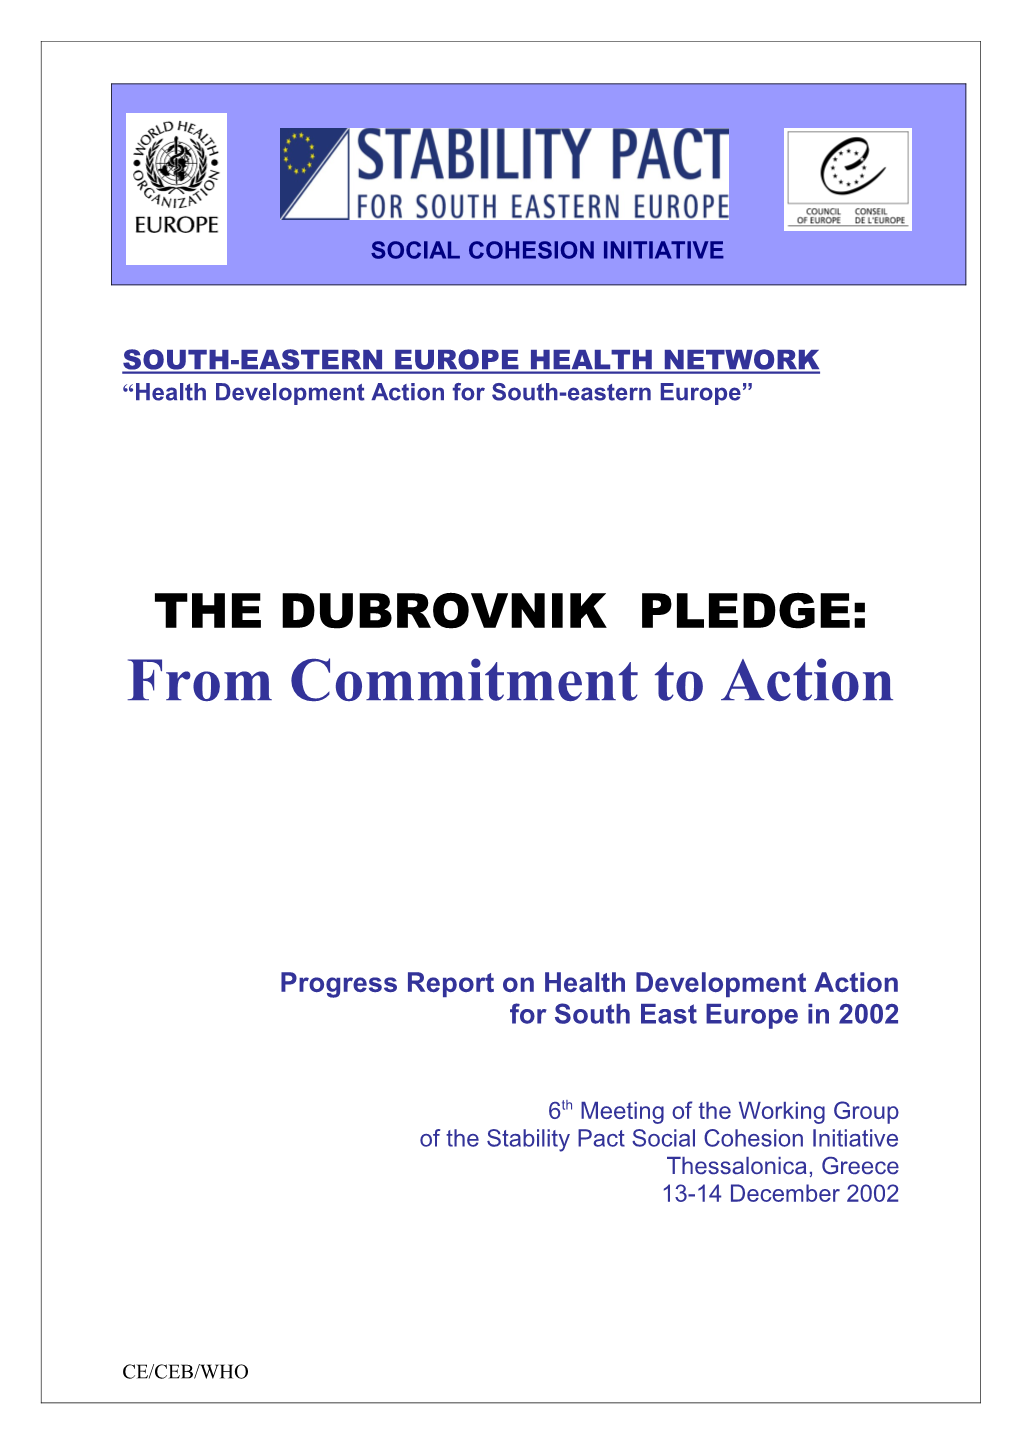 Health Development Action for South-Eastern Europe